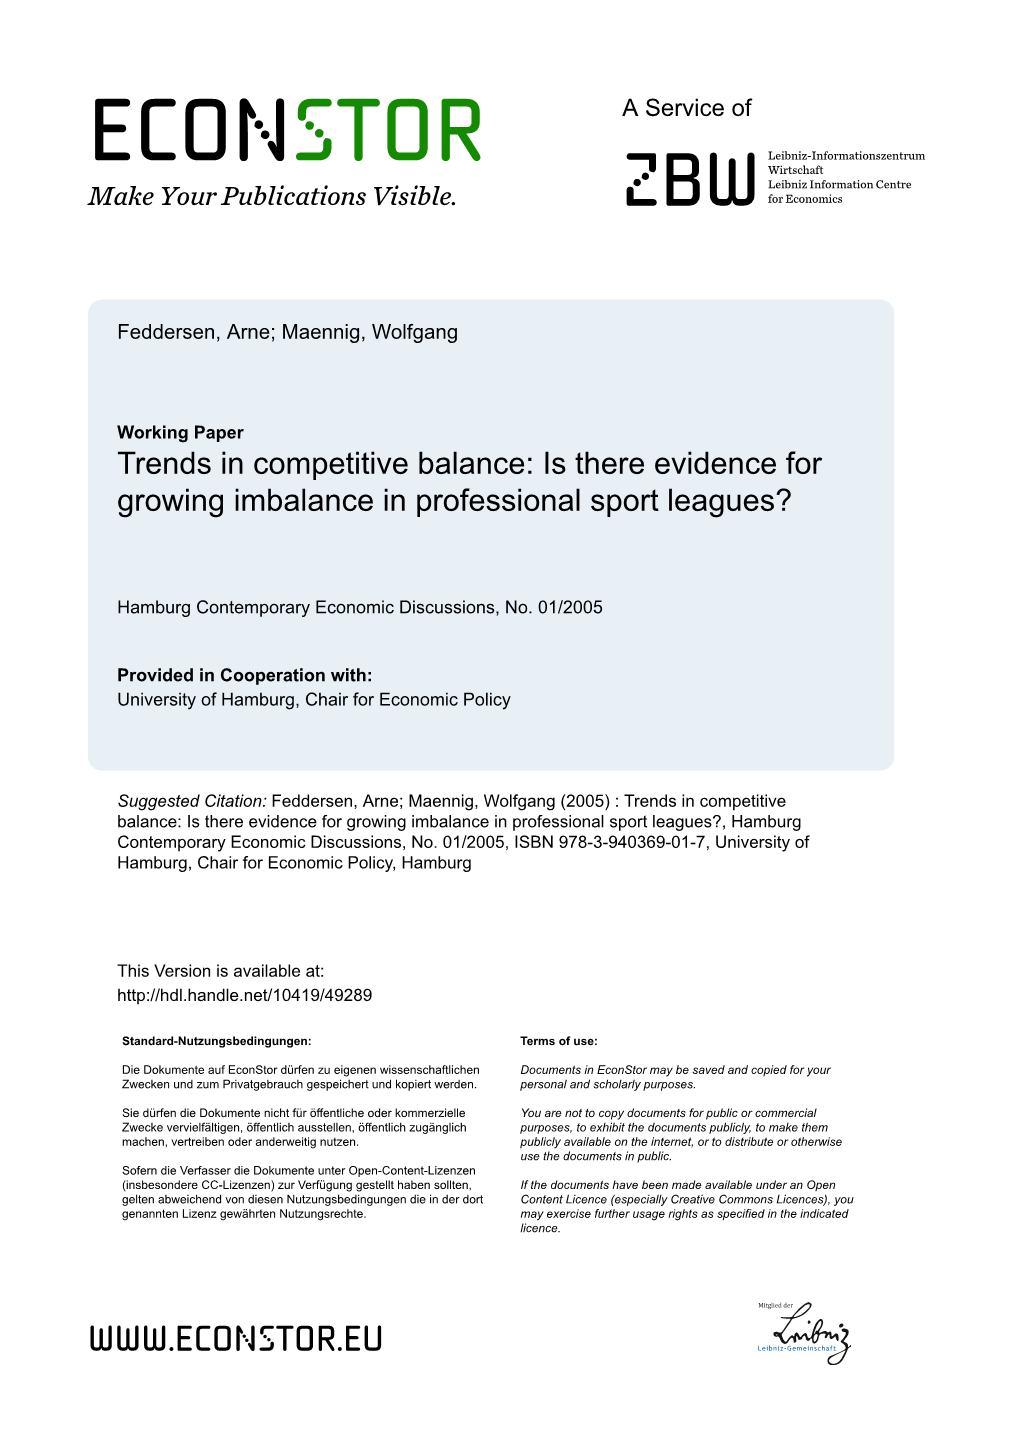 Trends in Competitive Balance: Is There Evidence for Growing Imbalance in Professional Sport Leagues?